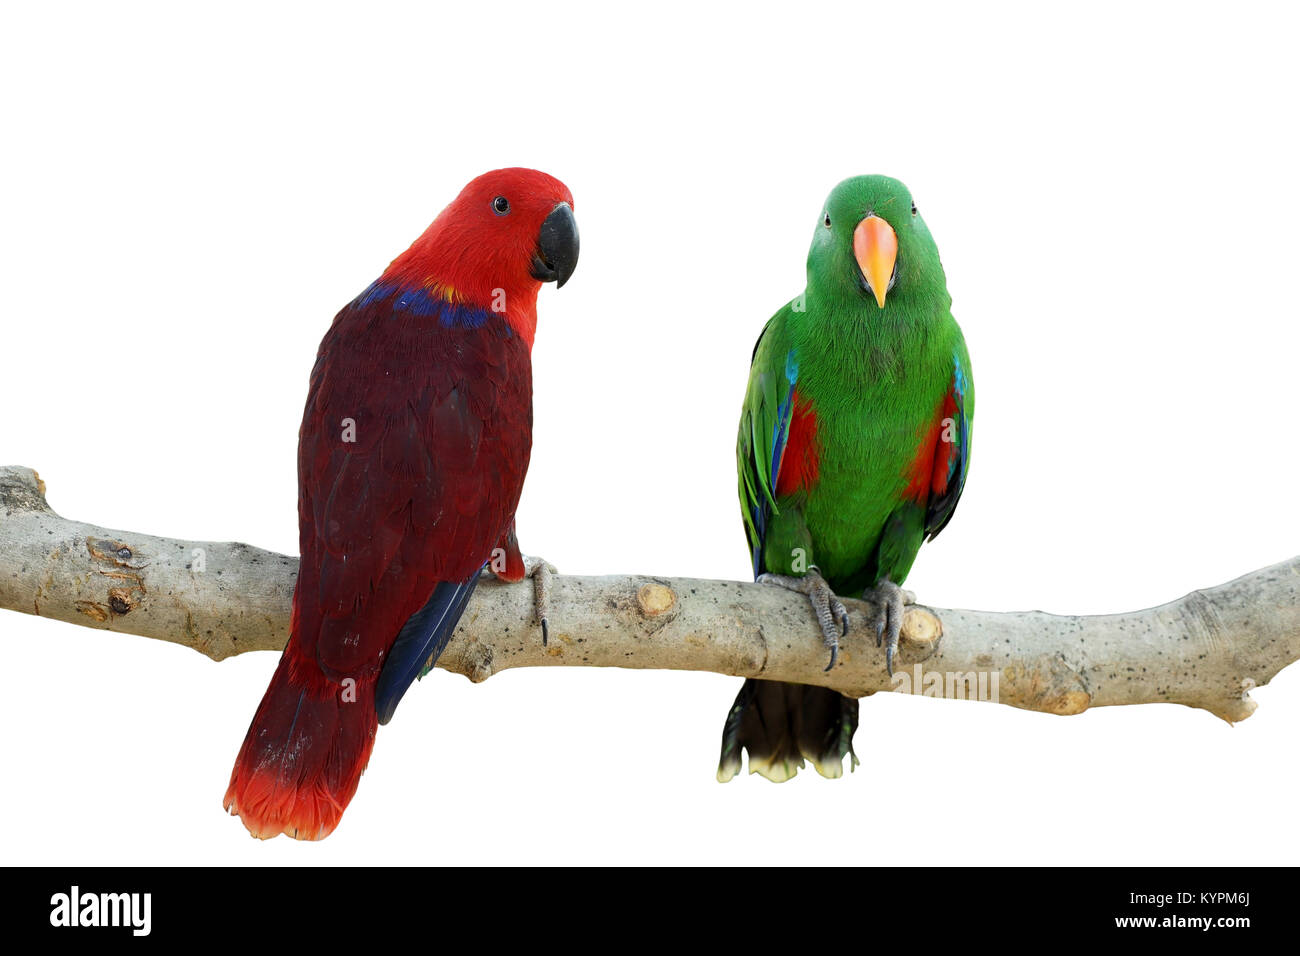 red and green parrot bird isolated on white background Stock Photo